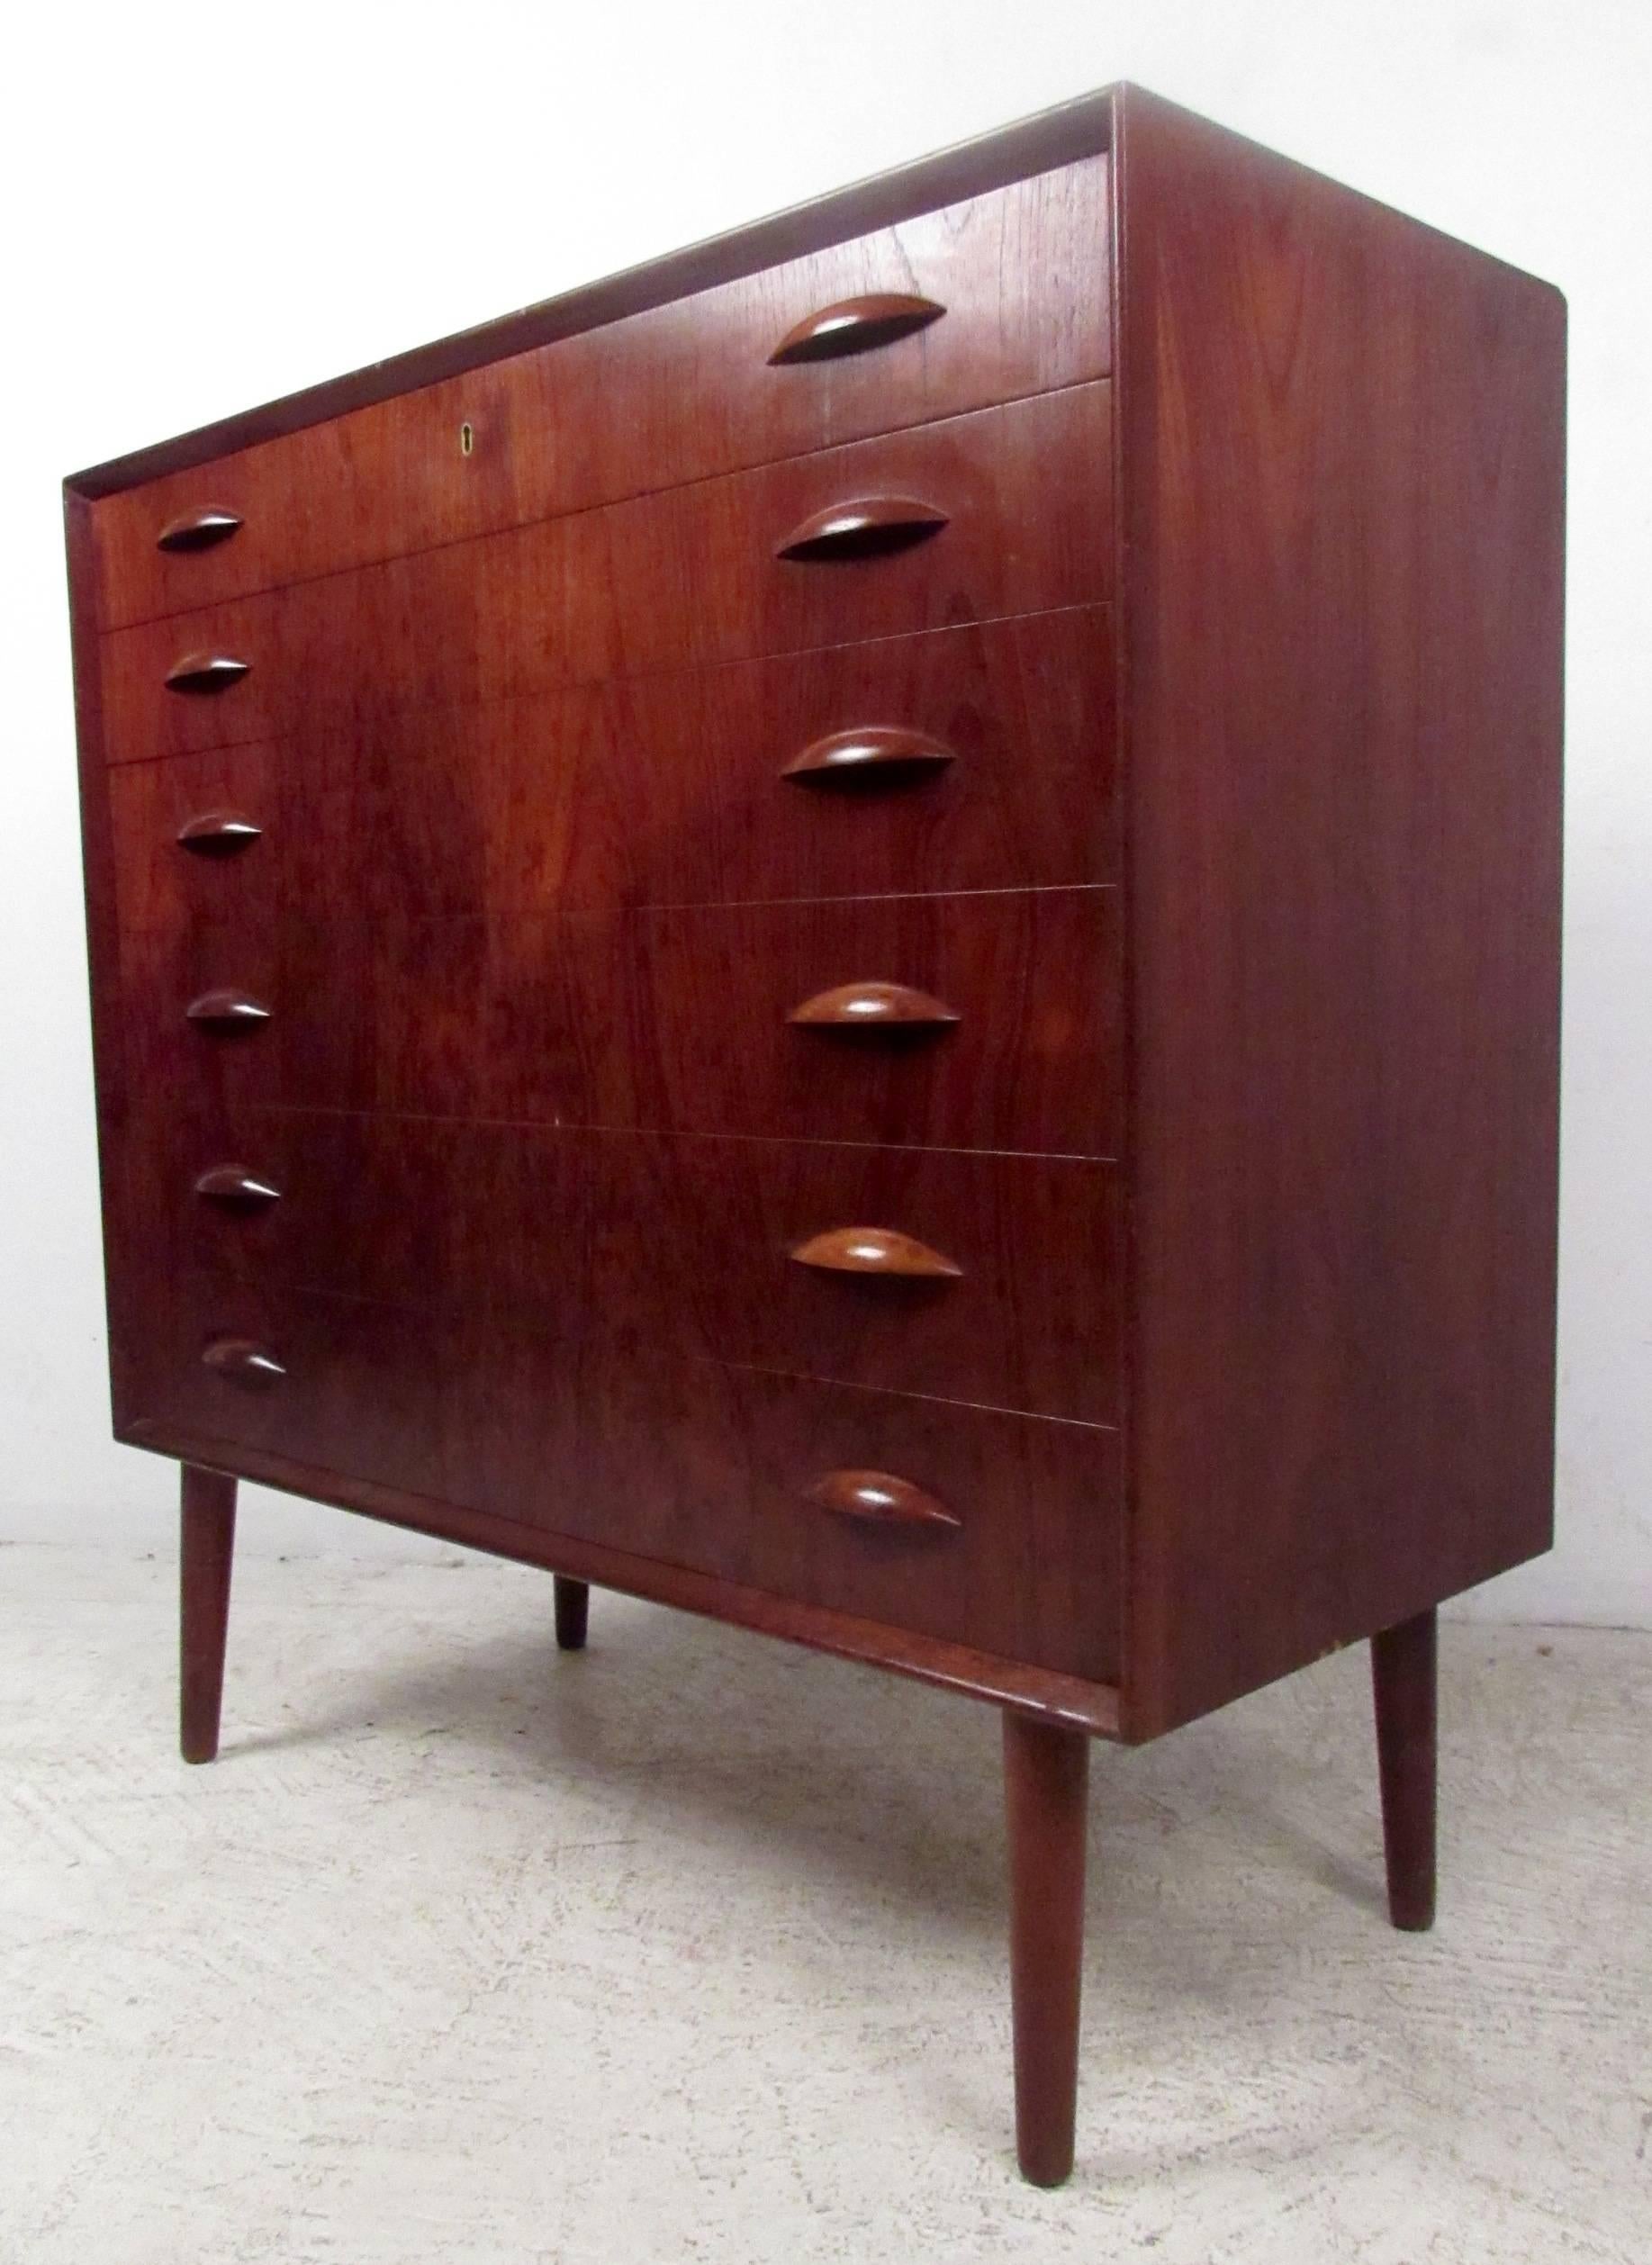 Vintage teak Kai Kristiensen highboy dresser featuring sculpted handles and tapered legs. Iconic Scandinavian Modern design makes this the perfect storage dresser for any bedroom. Please confirm item location (NY or NJ.)
